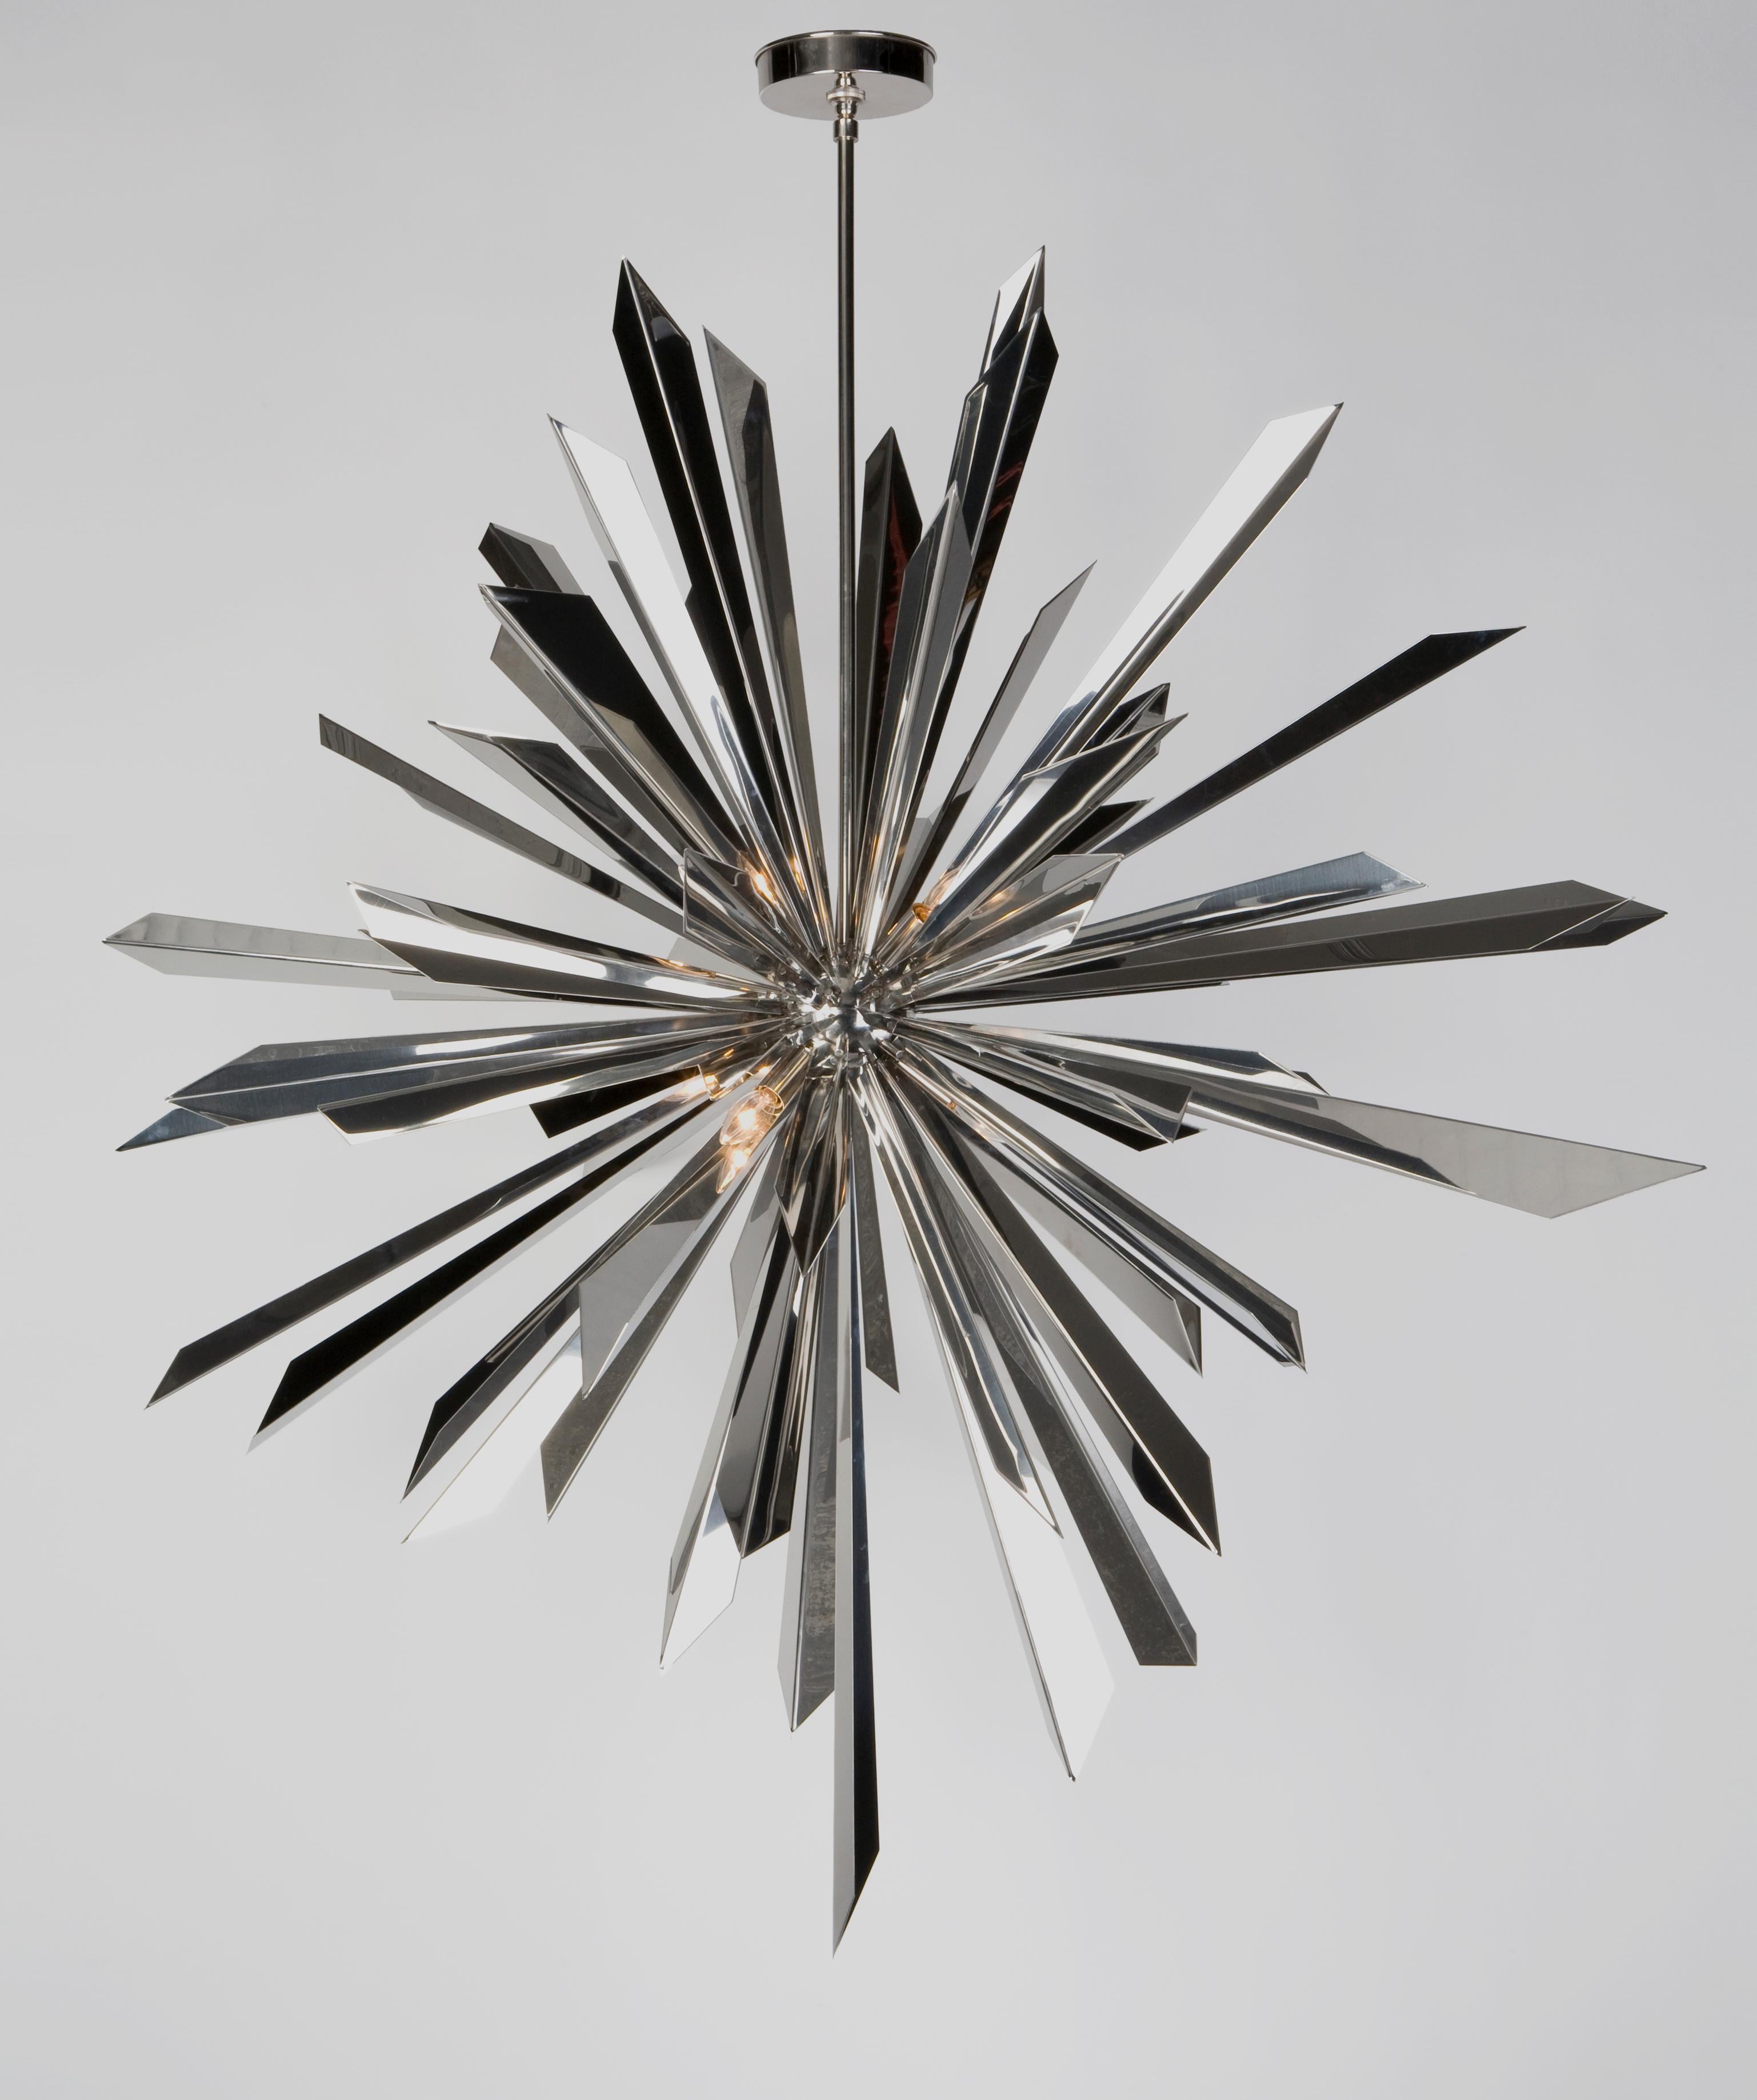 American California Sunburst 45 Chandelier designed by Tony Duquette for Remains Lighting